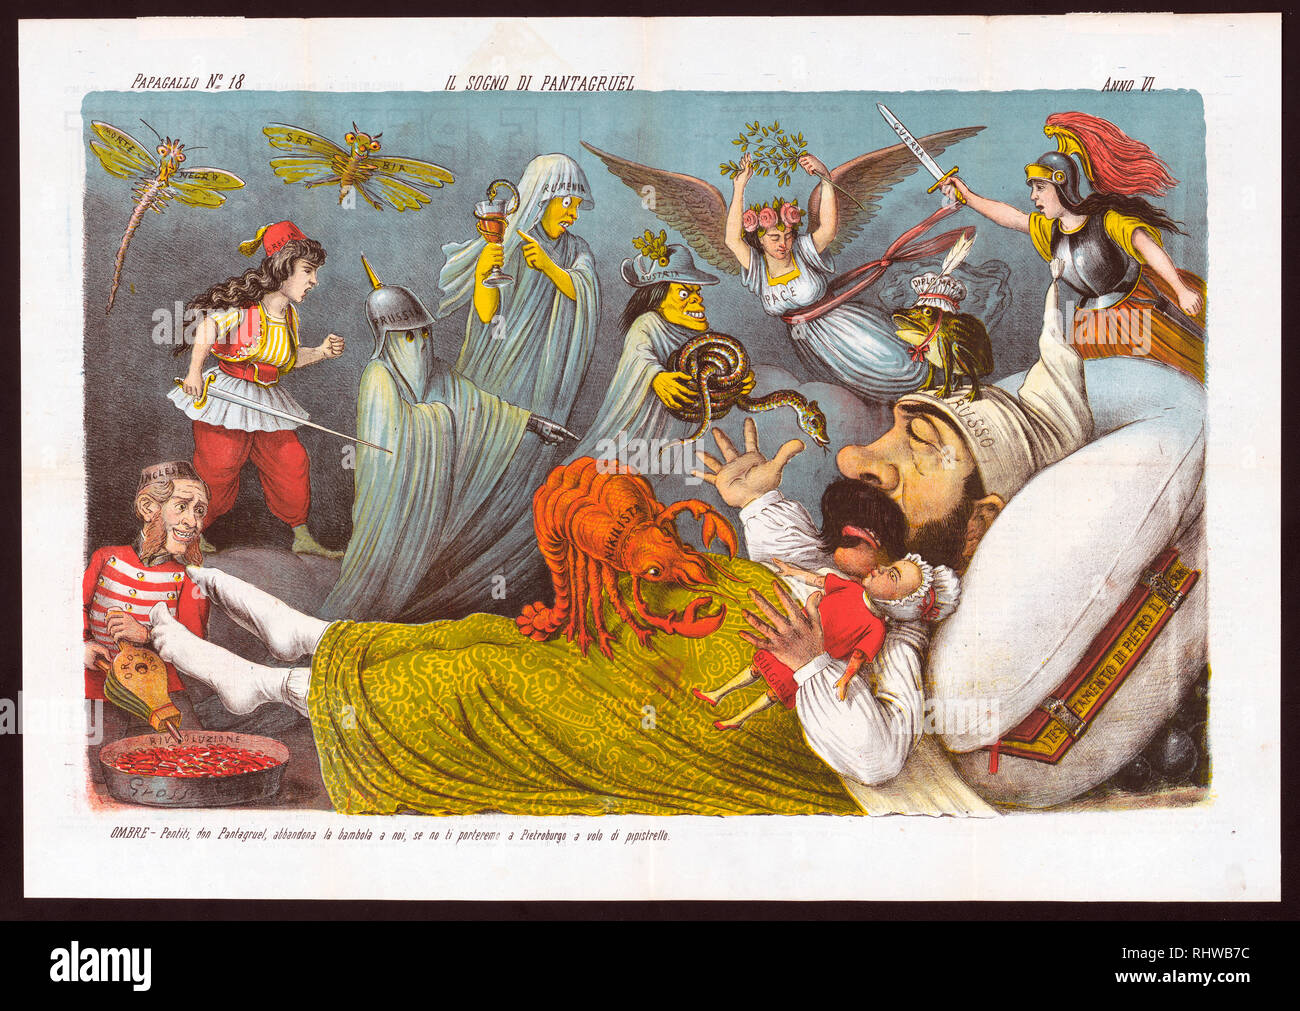 Italian political cartoon shows Alexander II, Emperor of Russia, as Pantagruel, asleep in his bed with a doll labeled 'Bulgaria' in his arms. He is having a nightmarish dream with frightening visions who demand that he give the doll to them or they will send him flying back to Saint Petersburg. Directly confronting him are insects labeled 'Montenegro' and 'Serbia', a woman labeled 'Grecia' with drawn sword, ghosts labeled 'Prussia' and 'Rumenia', and a witch labeled 'Austria' with a green sprig in her hat and a large snake in her arms, and there is a large lobster labeled 'Nikilista' crawling  Stock Photo